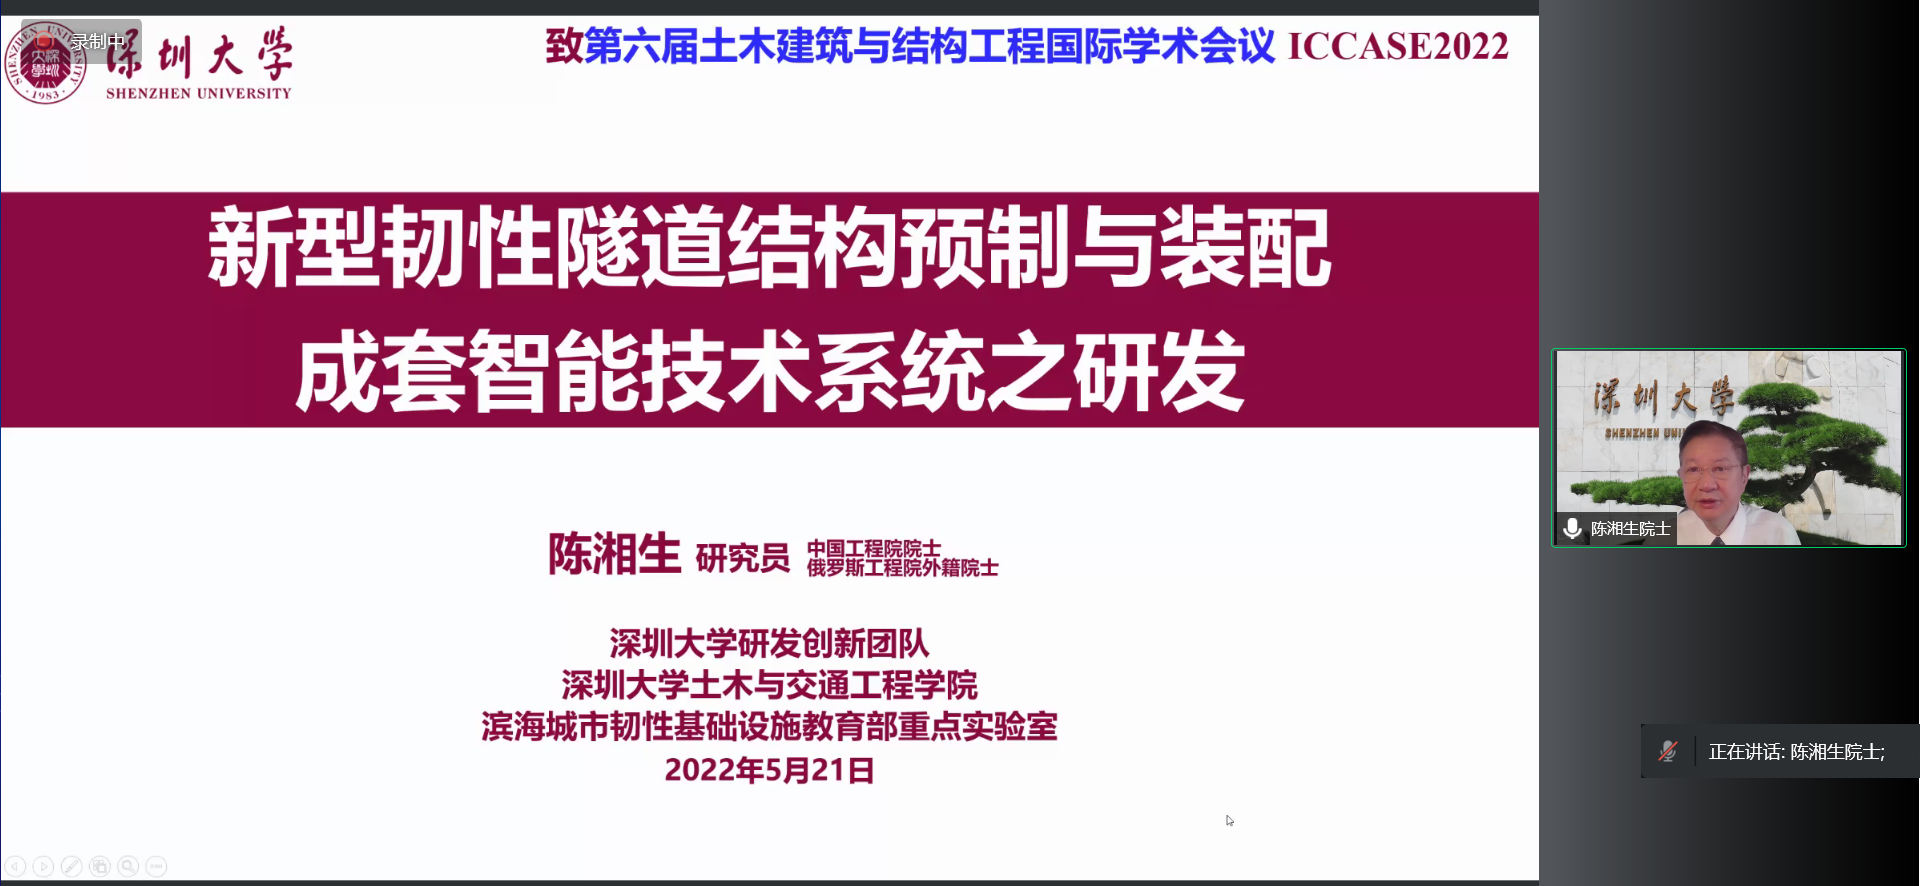 ICCASE 2022-1陈湘生.png